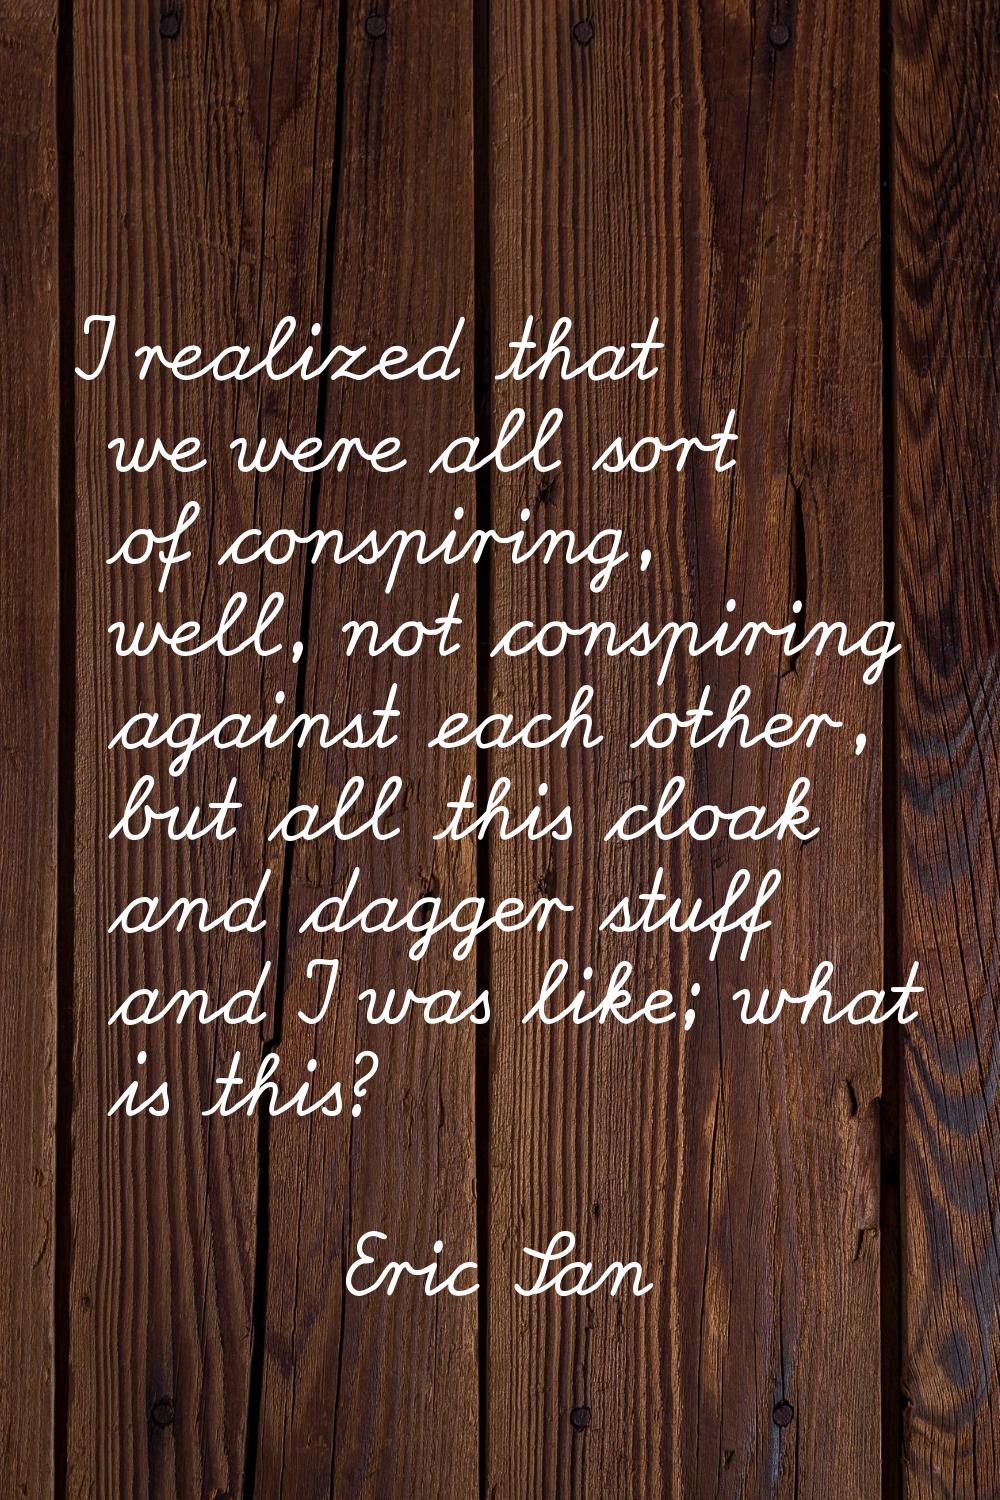 I realized that we were all sort of conspiring, well, not conspiring against each other, but all th